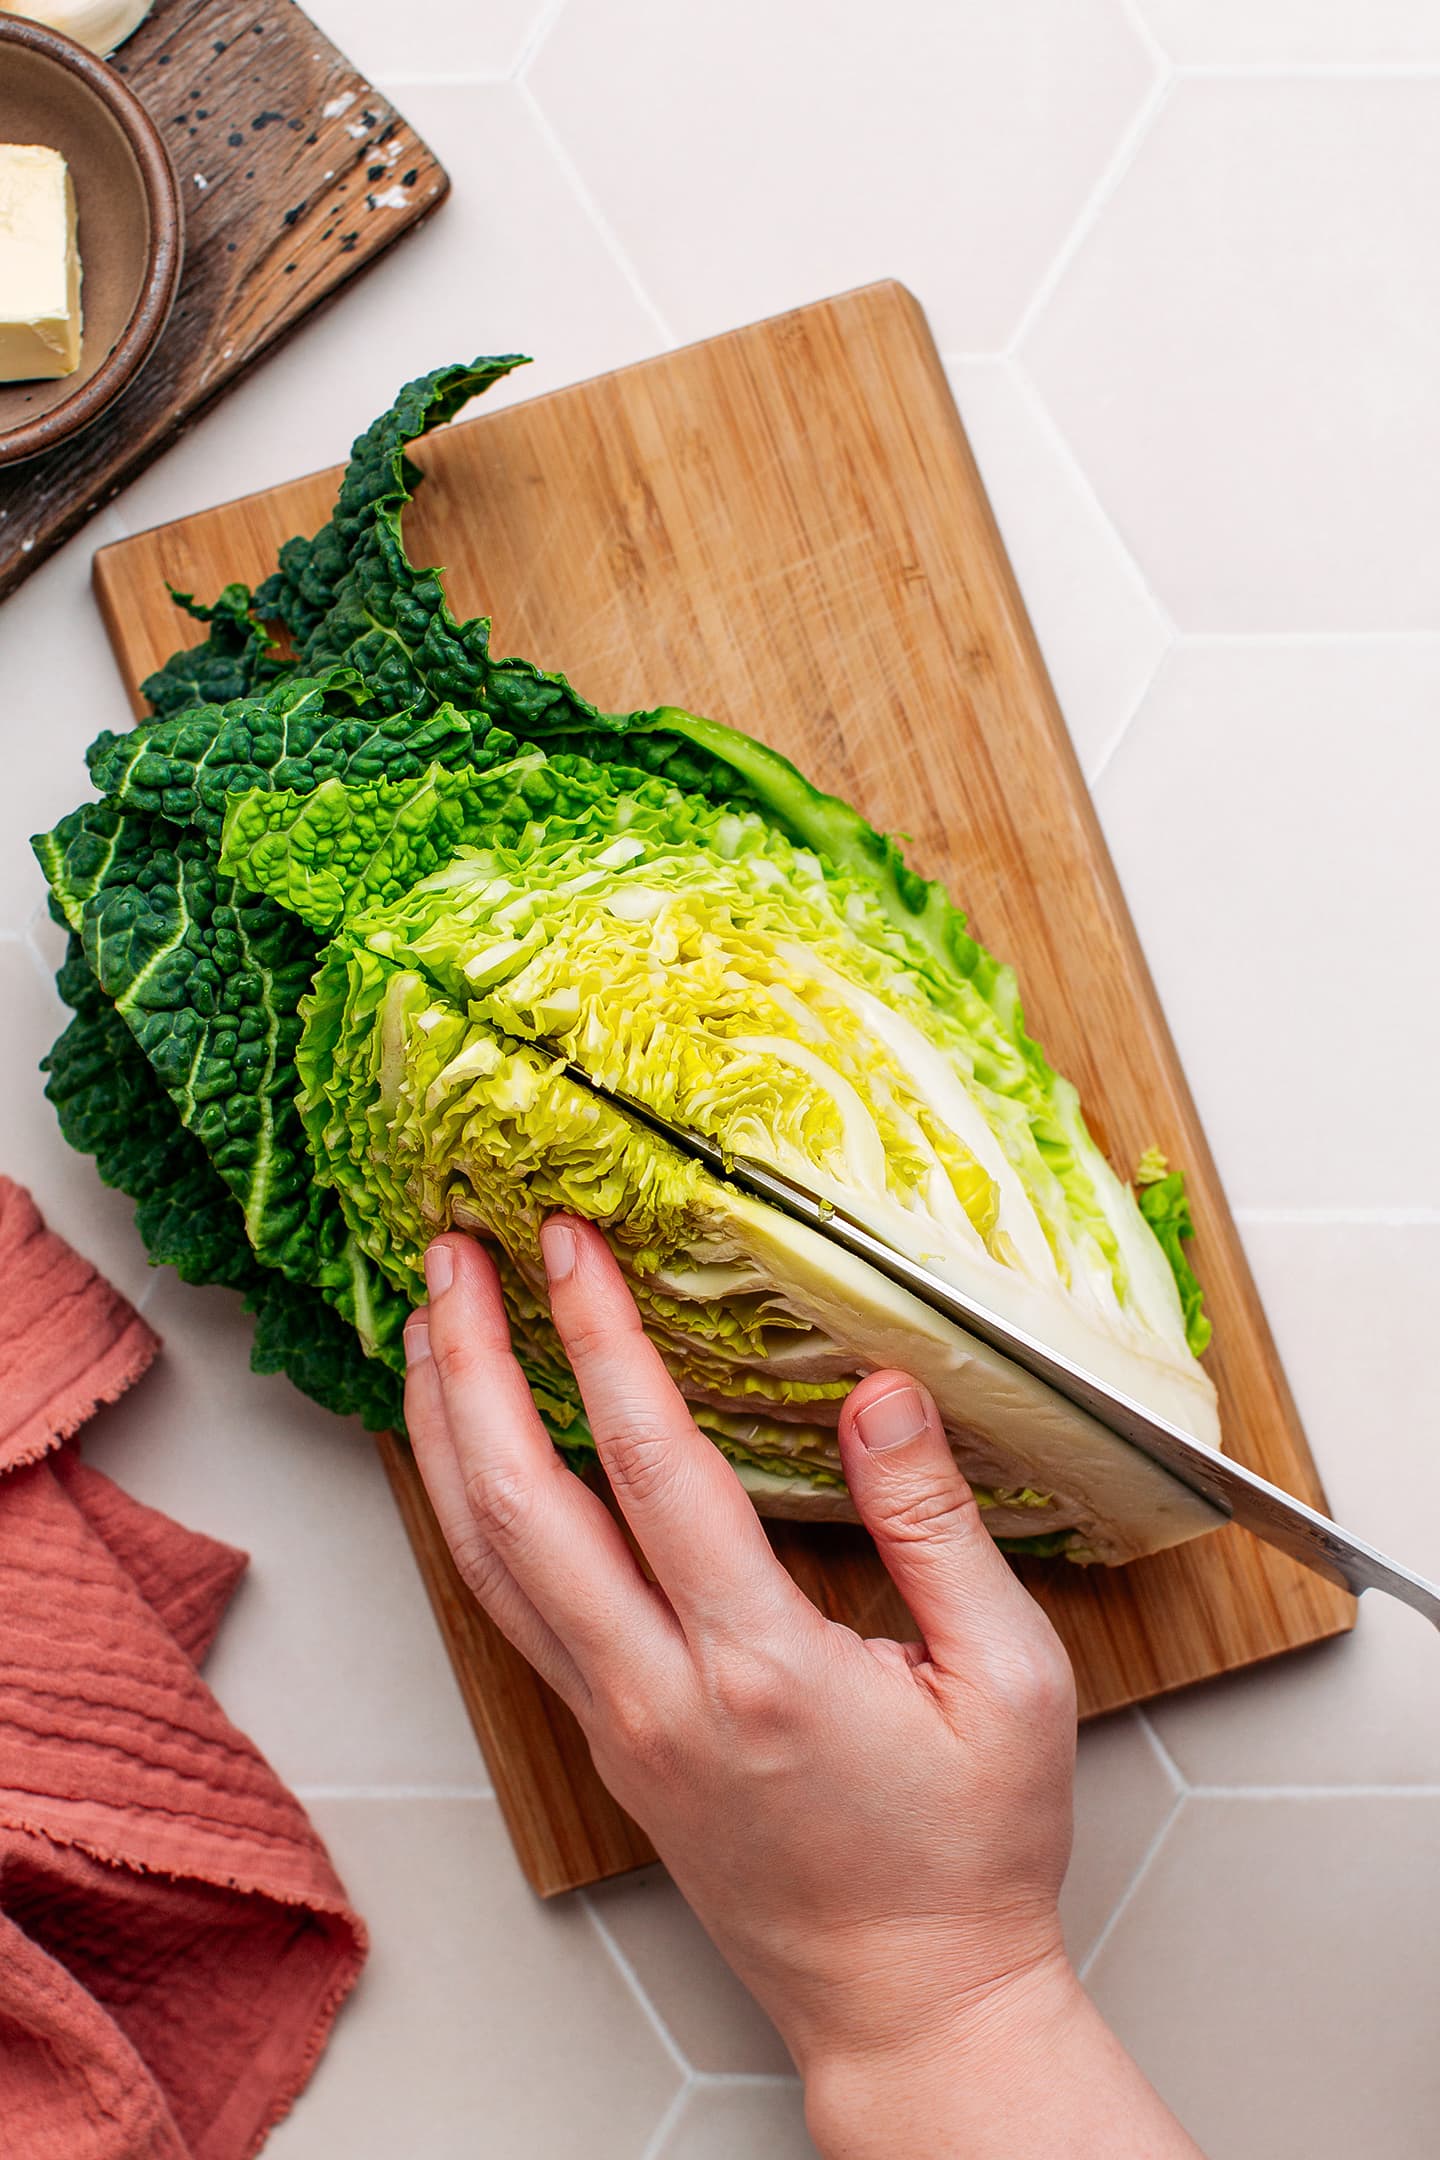 Slicing a quarter of a savoy cabbage head.